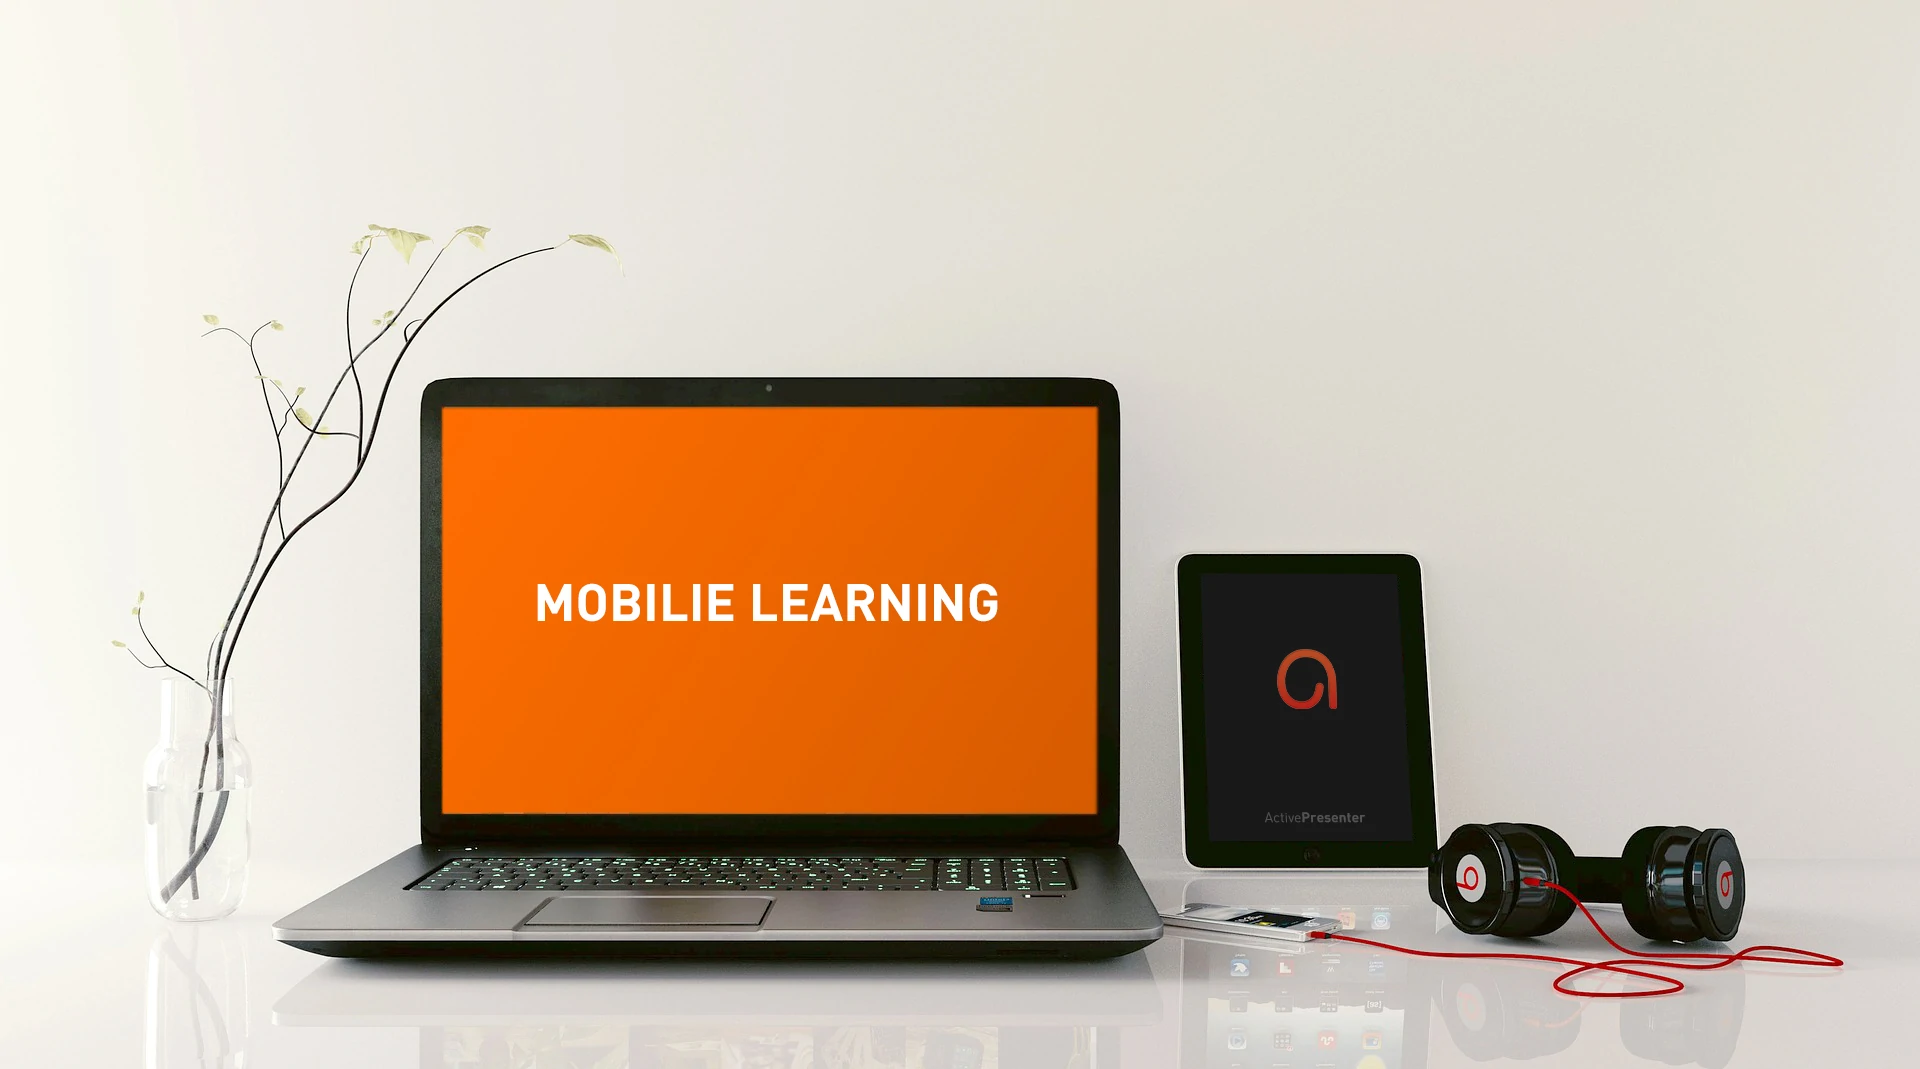 Mobile Learning is a Revolution in Education